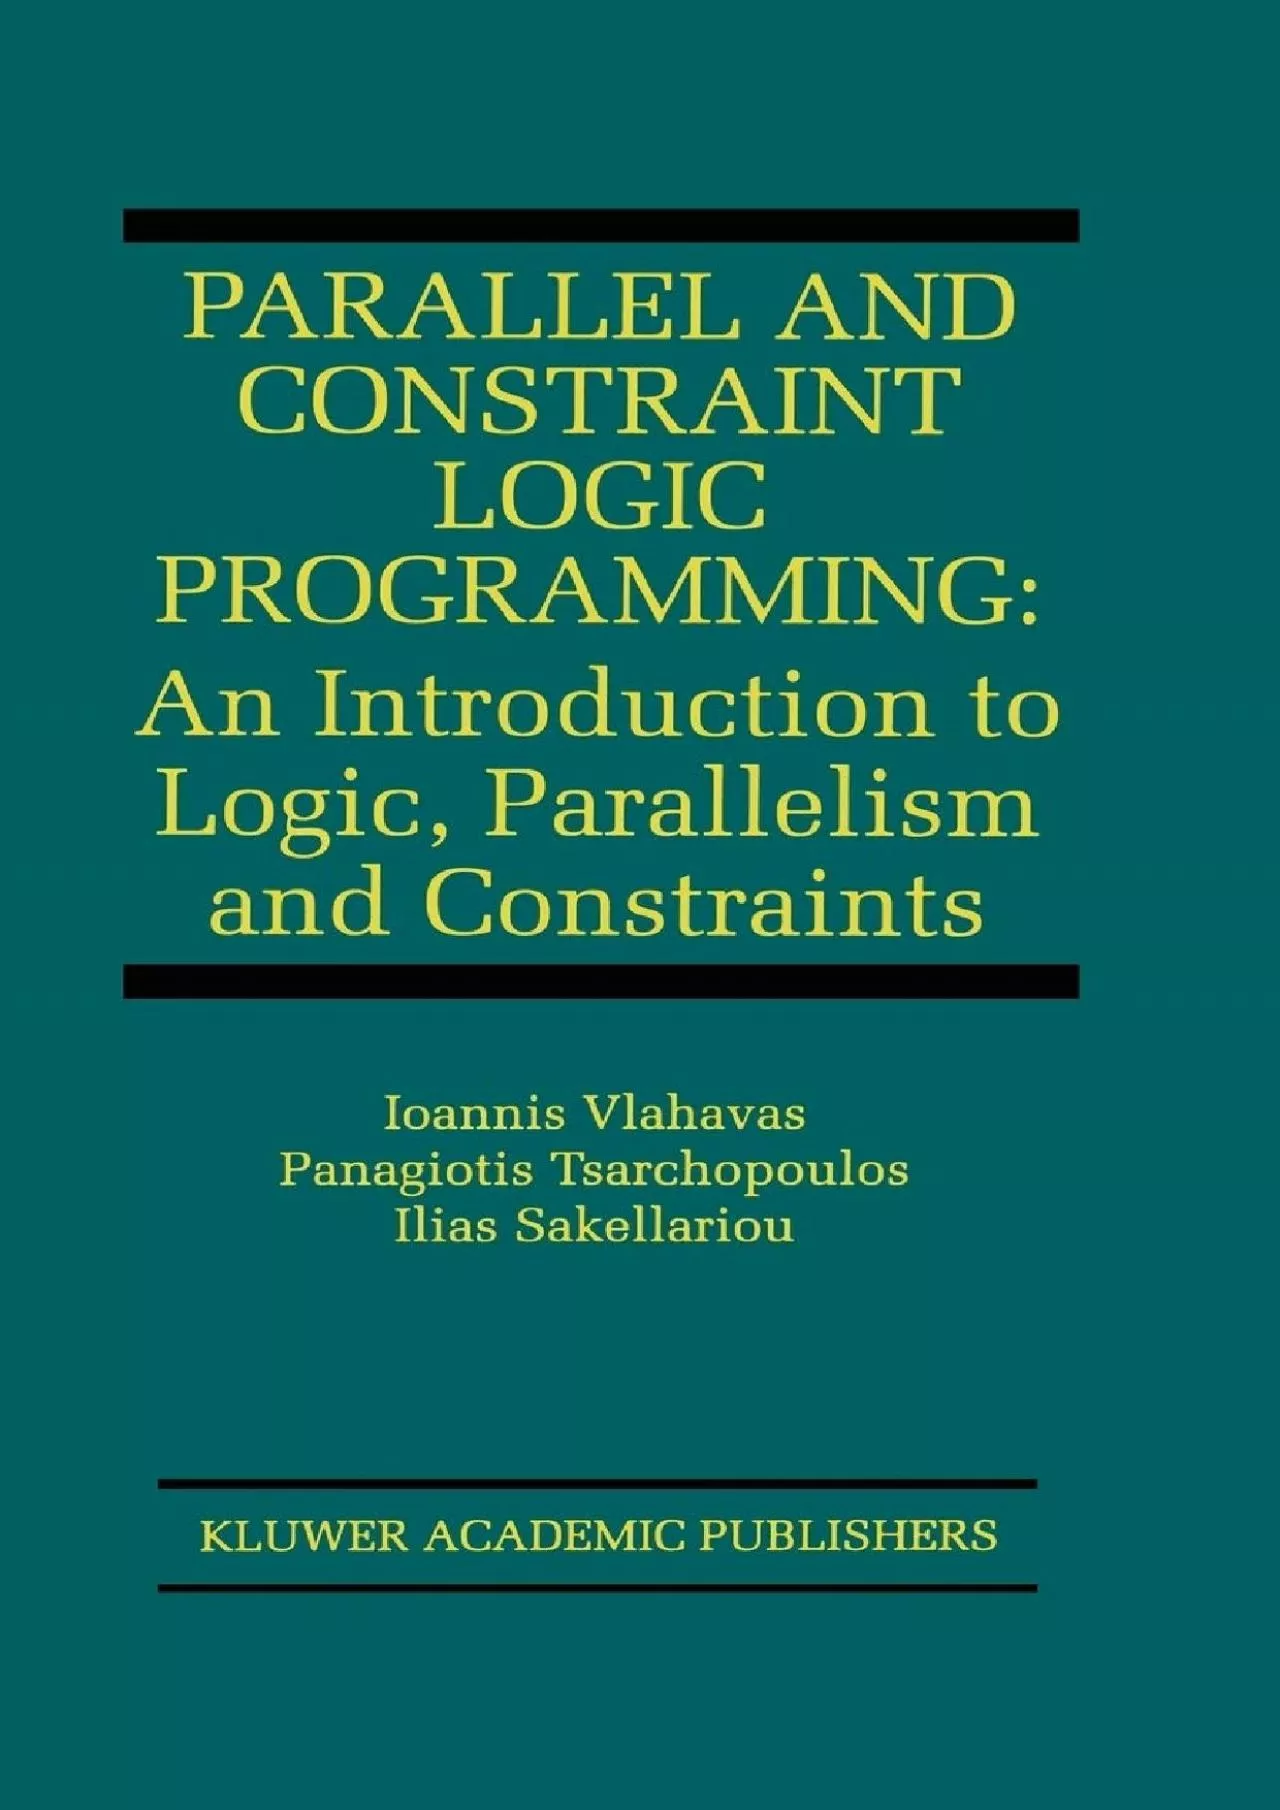 [BEST]-Parallel and Constraint Logic Programming: An Introduction to Logic, Parallelism